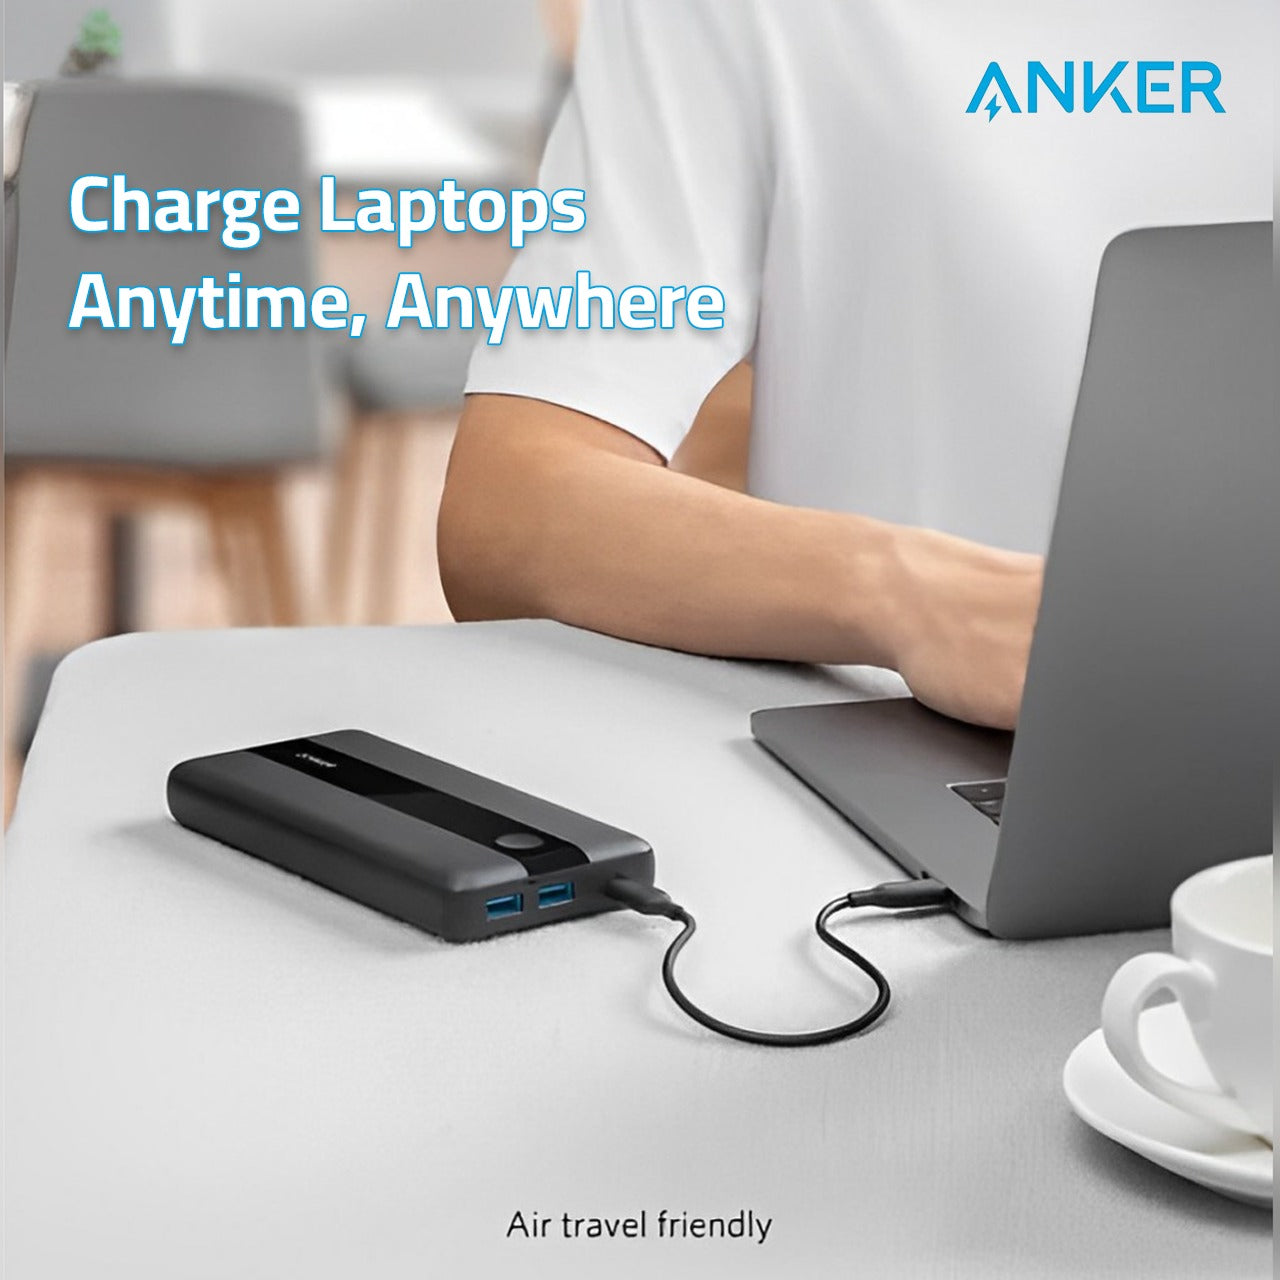 A Person Uses Laptop While Charging Using ANKER PowerCore III 19K High-Speed Portable Laptop Charger.